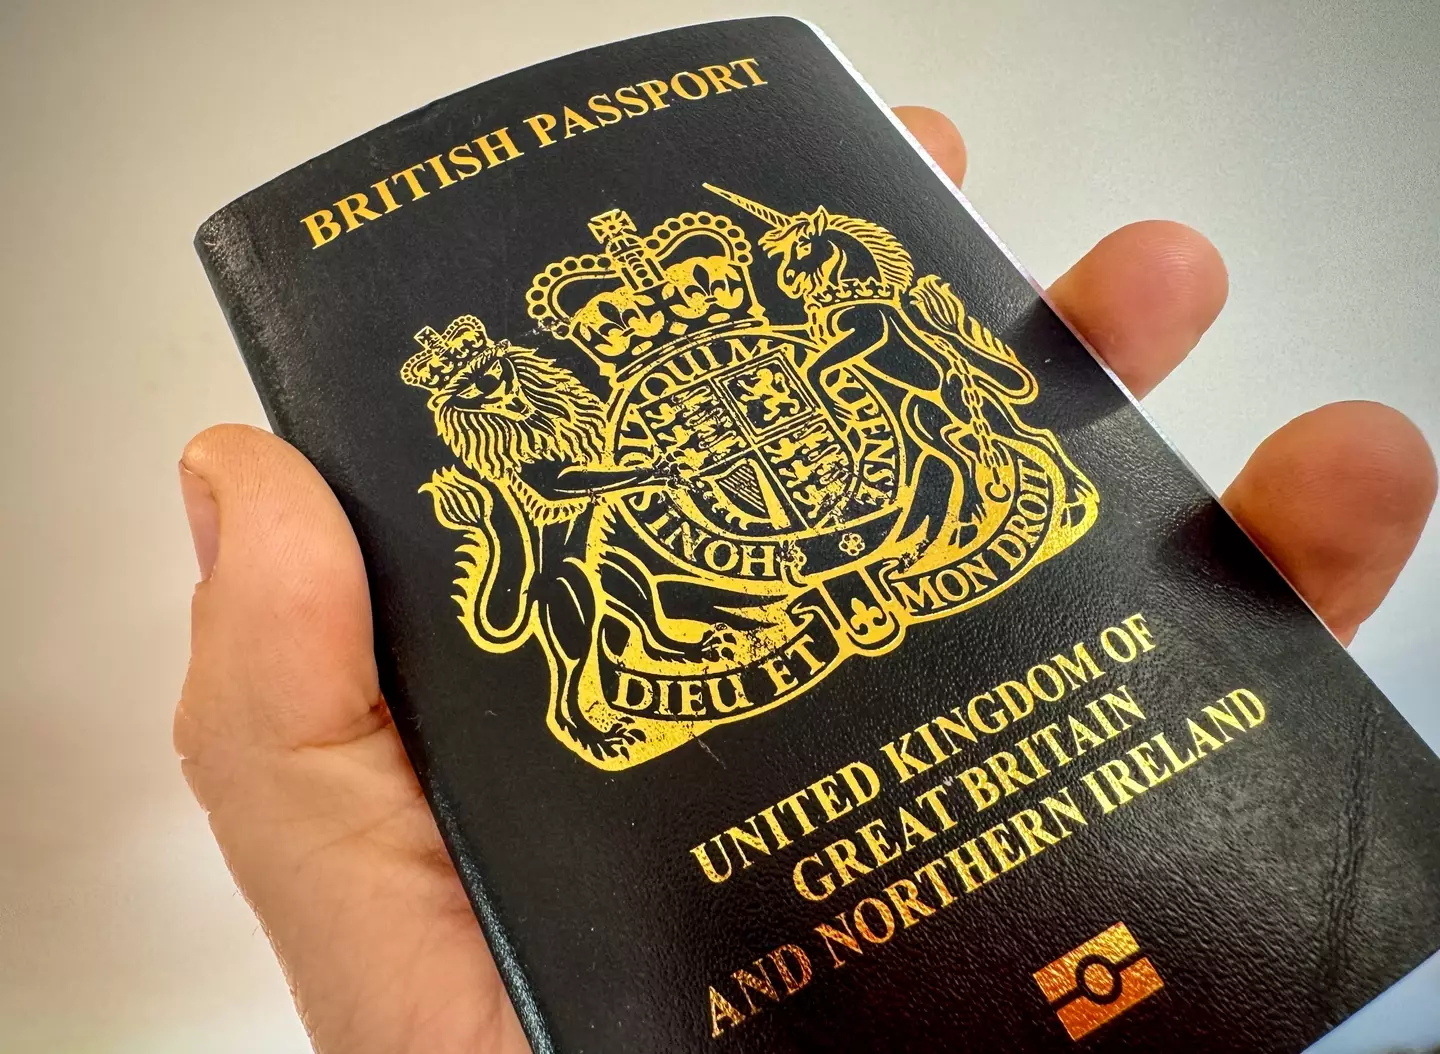 You may want to check your passport expiry date...